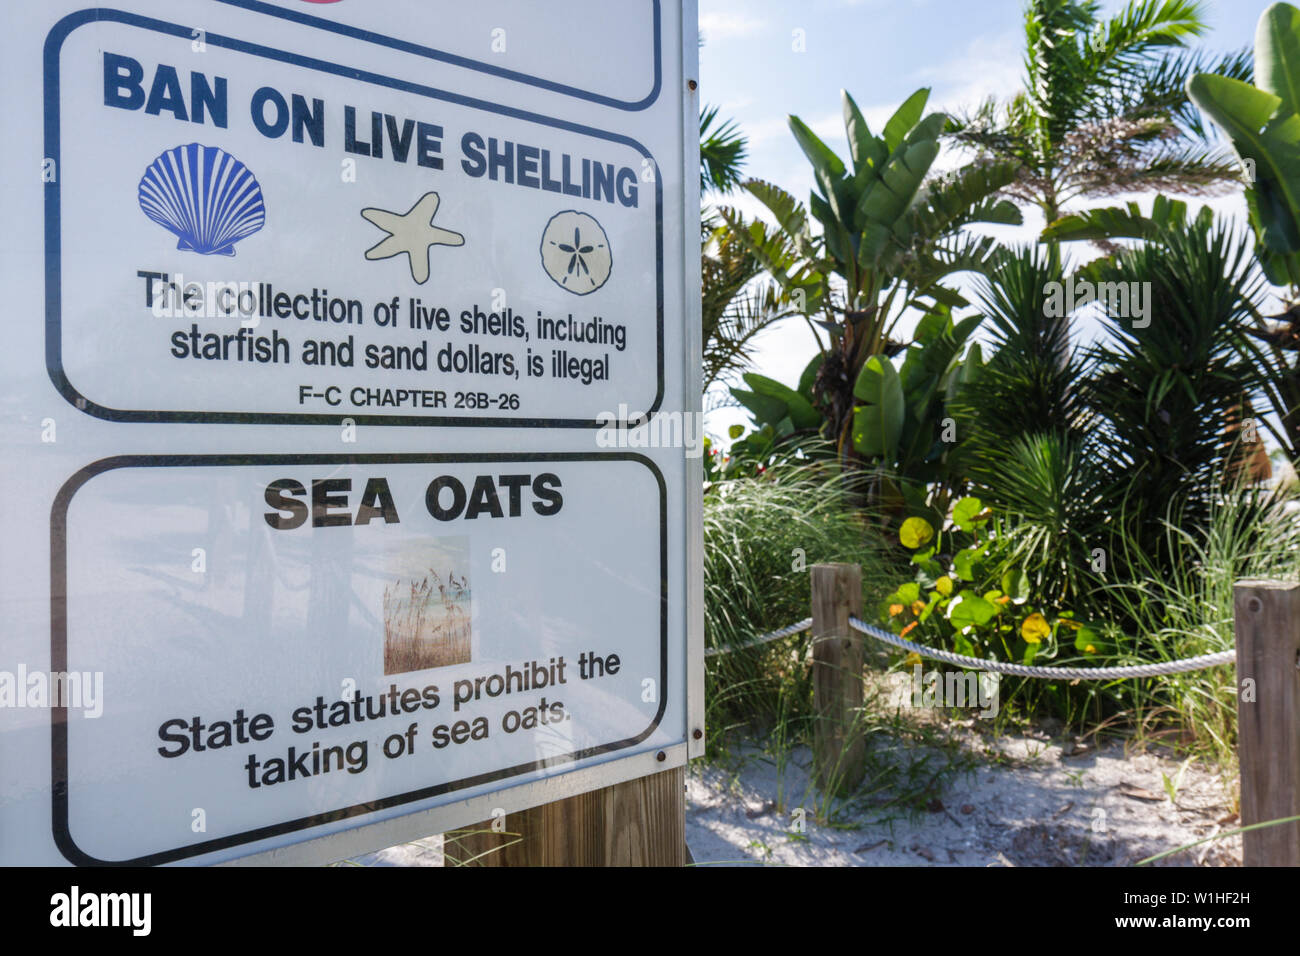 Florida Collier County,Fort Ft. Myers Beach,Gulf of Mexico Coast,public beach,park rules,sign,graphics,regulations,protected specie,vegetation,ecosyst Stock Photo